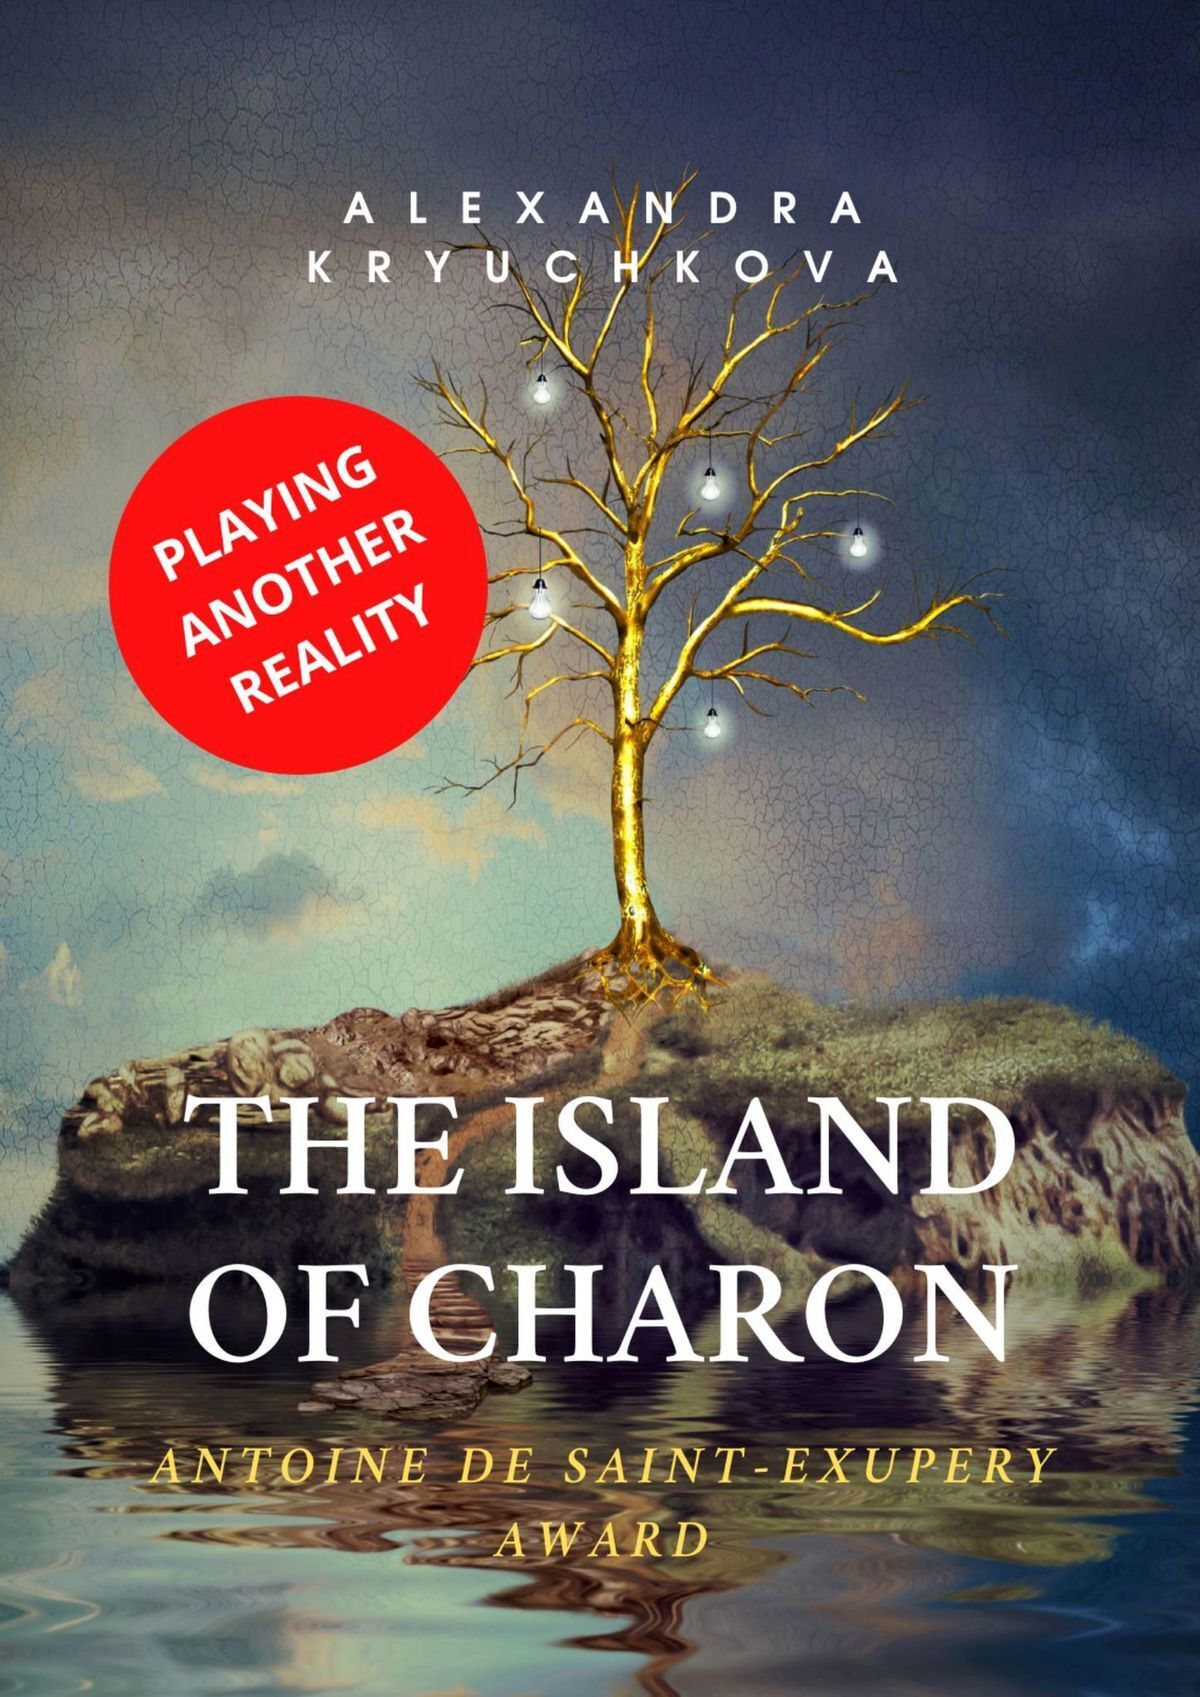 The Island of Charon. Playing Another Reality. Antoine de Saint-Exupery Award